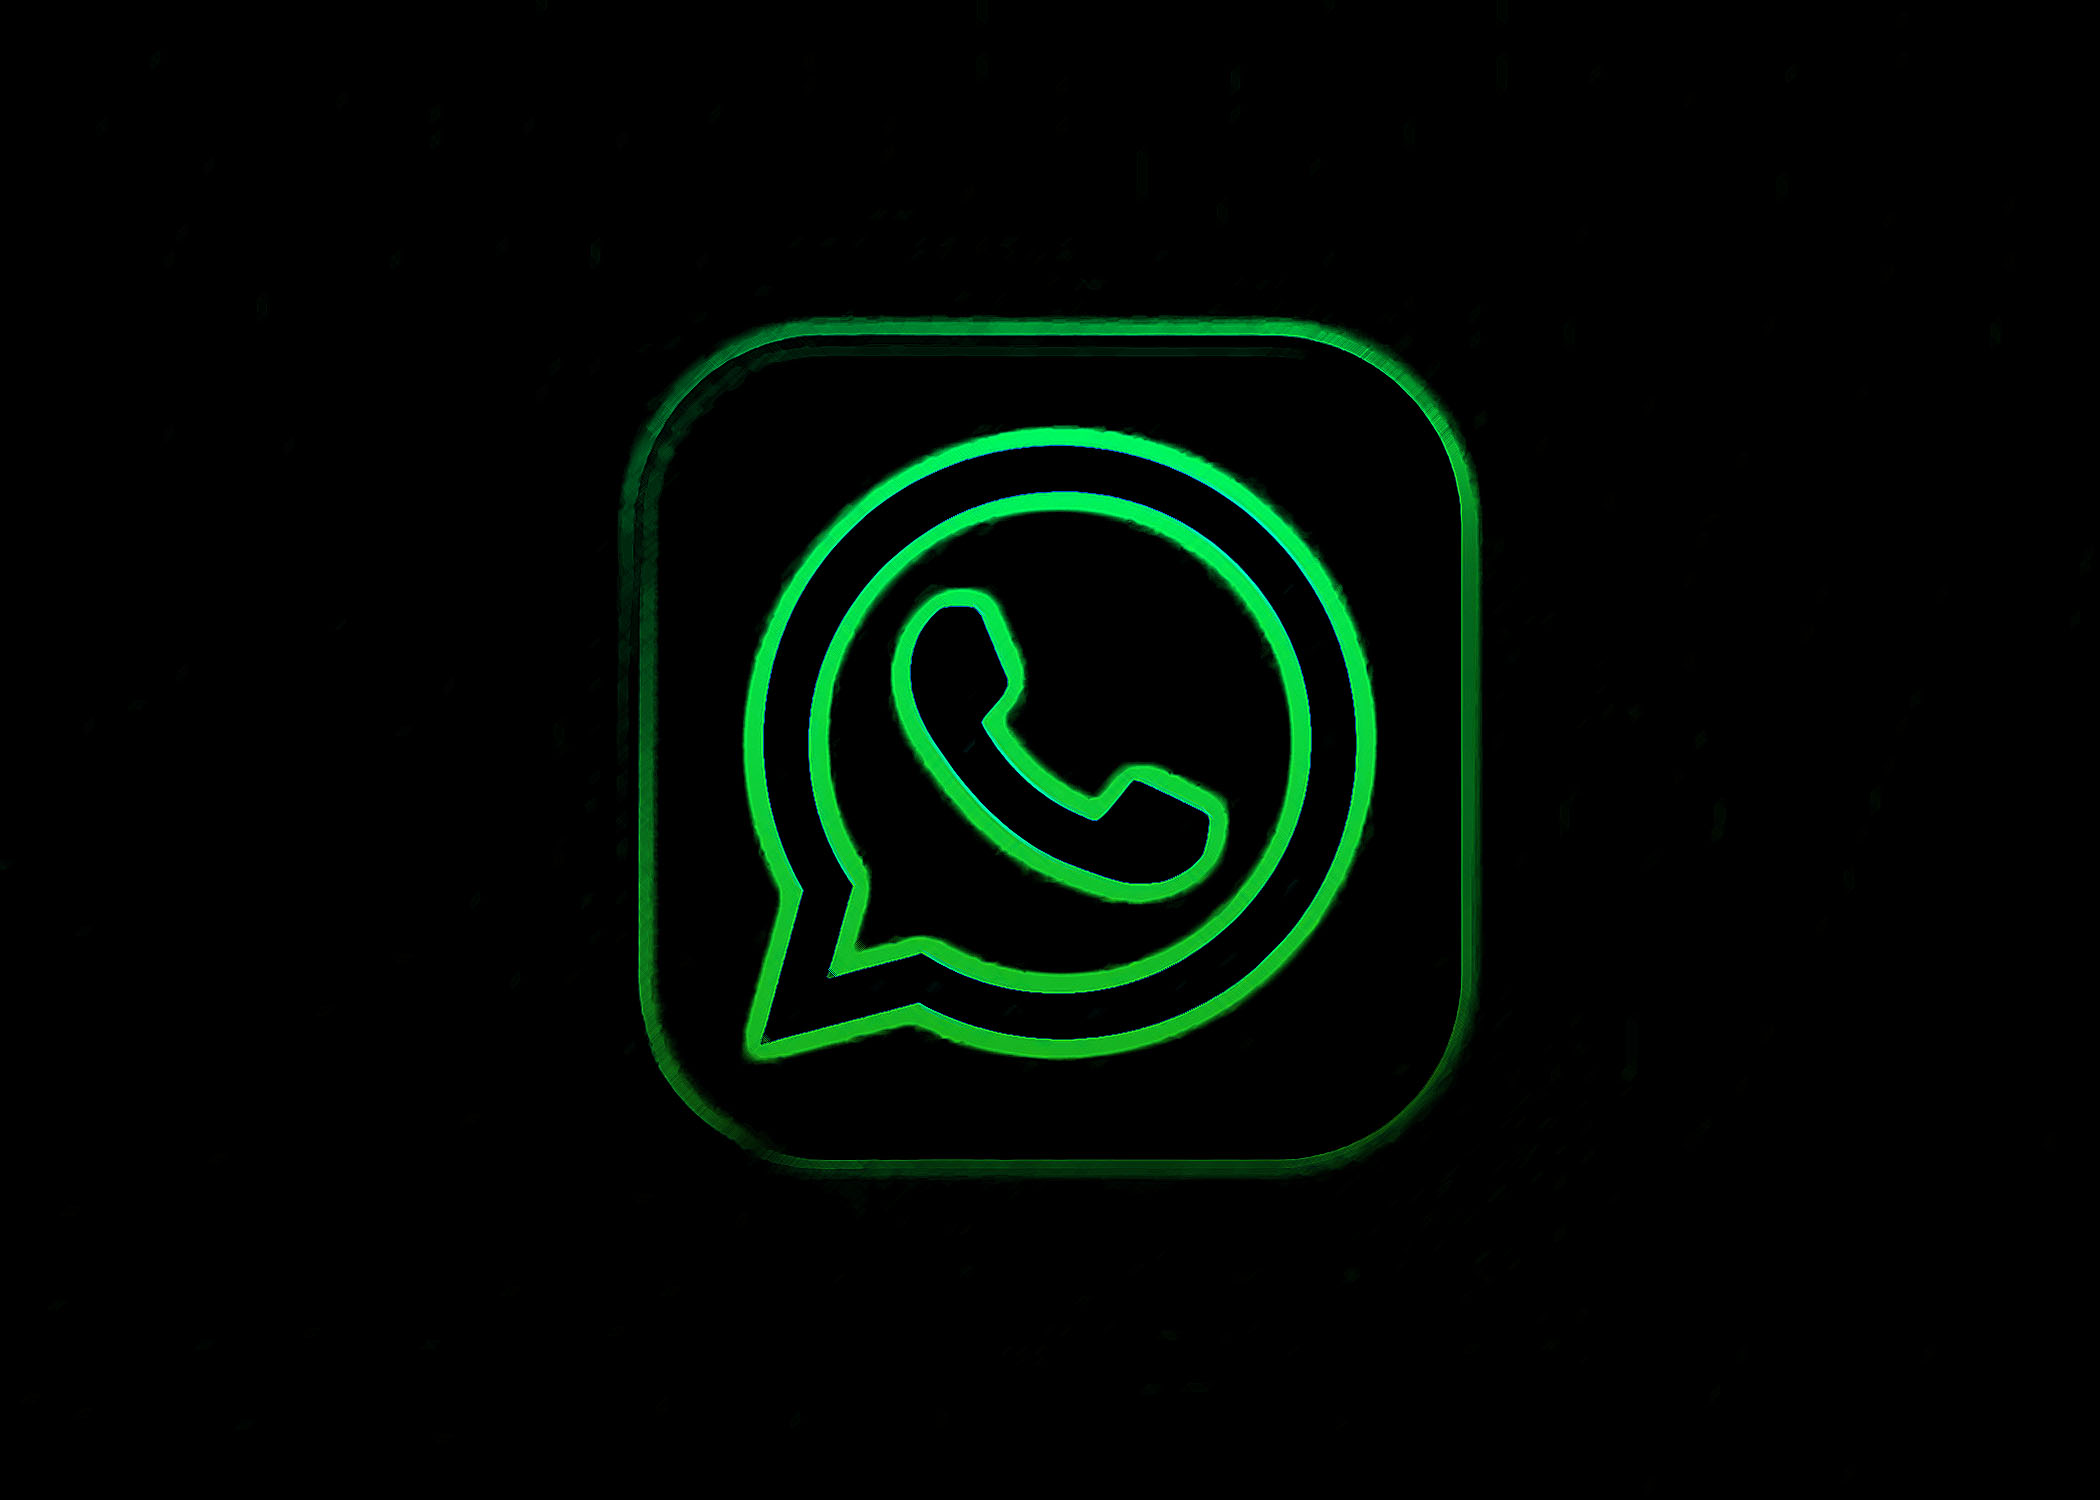 WhatsApp’s Role in Elections: A Concern for Mozilla